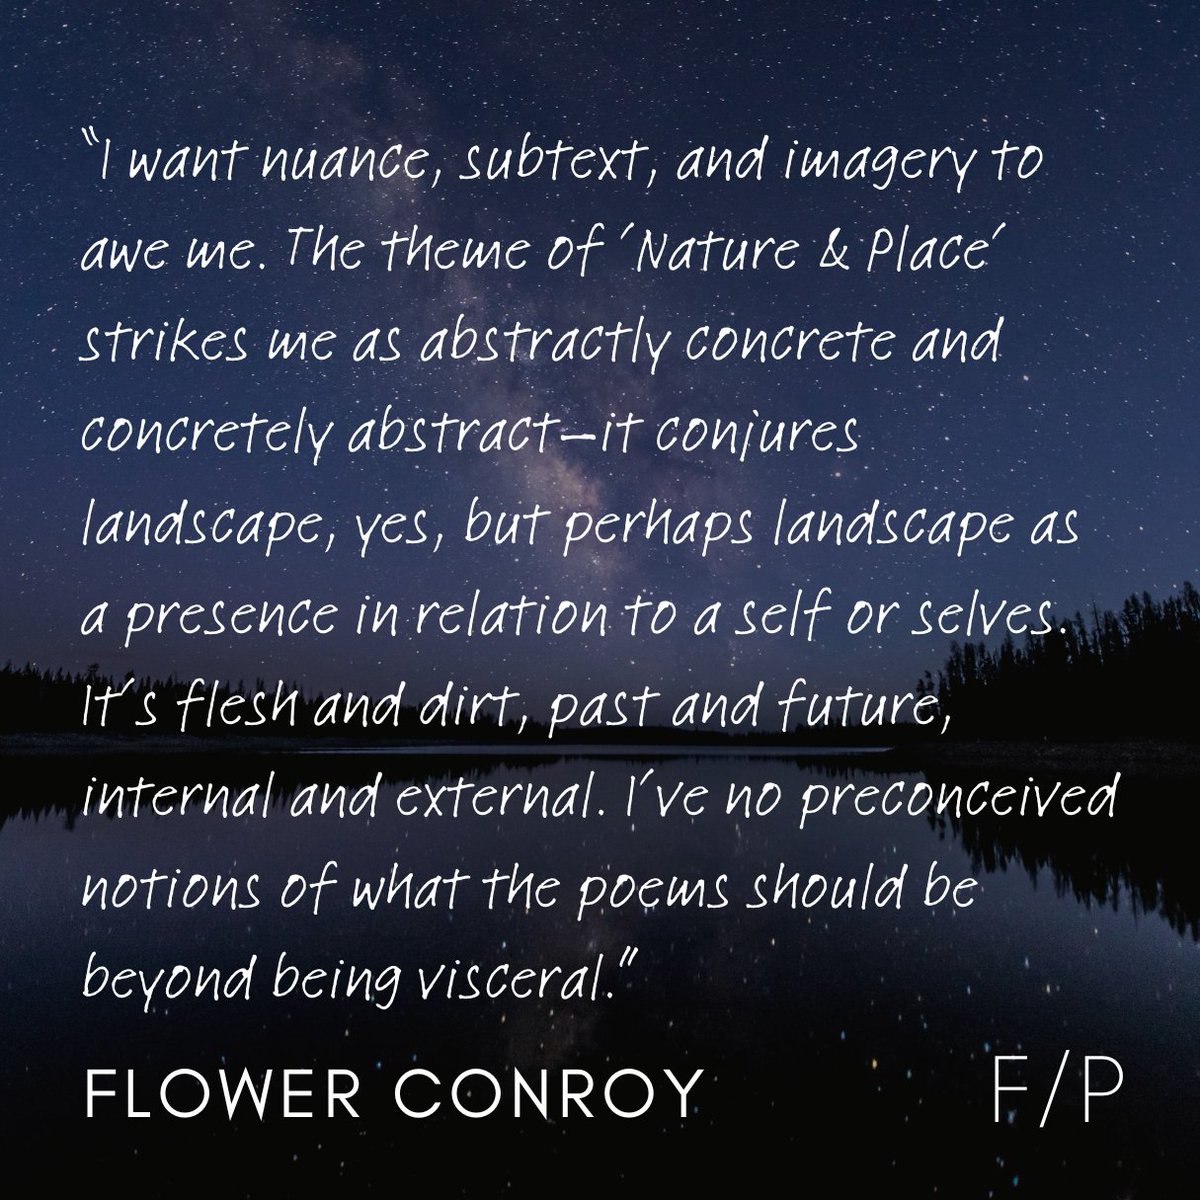 Wondering what Flower Conroy is looking for in your submission? Here are some great insights to keep in mind when writing for our Nature & Place Prize! Submit your work: frontierpoetry.com/poetry-awards/